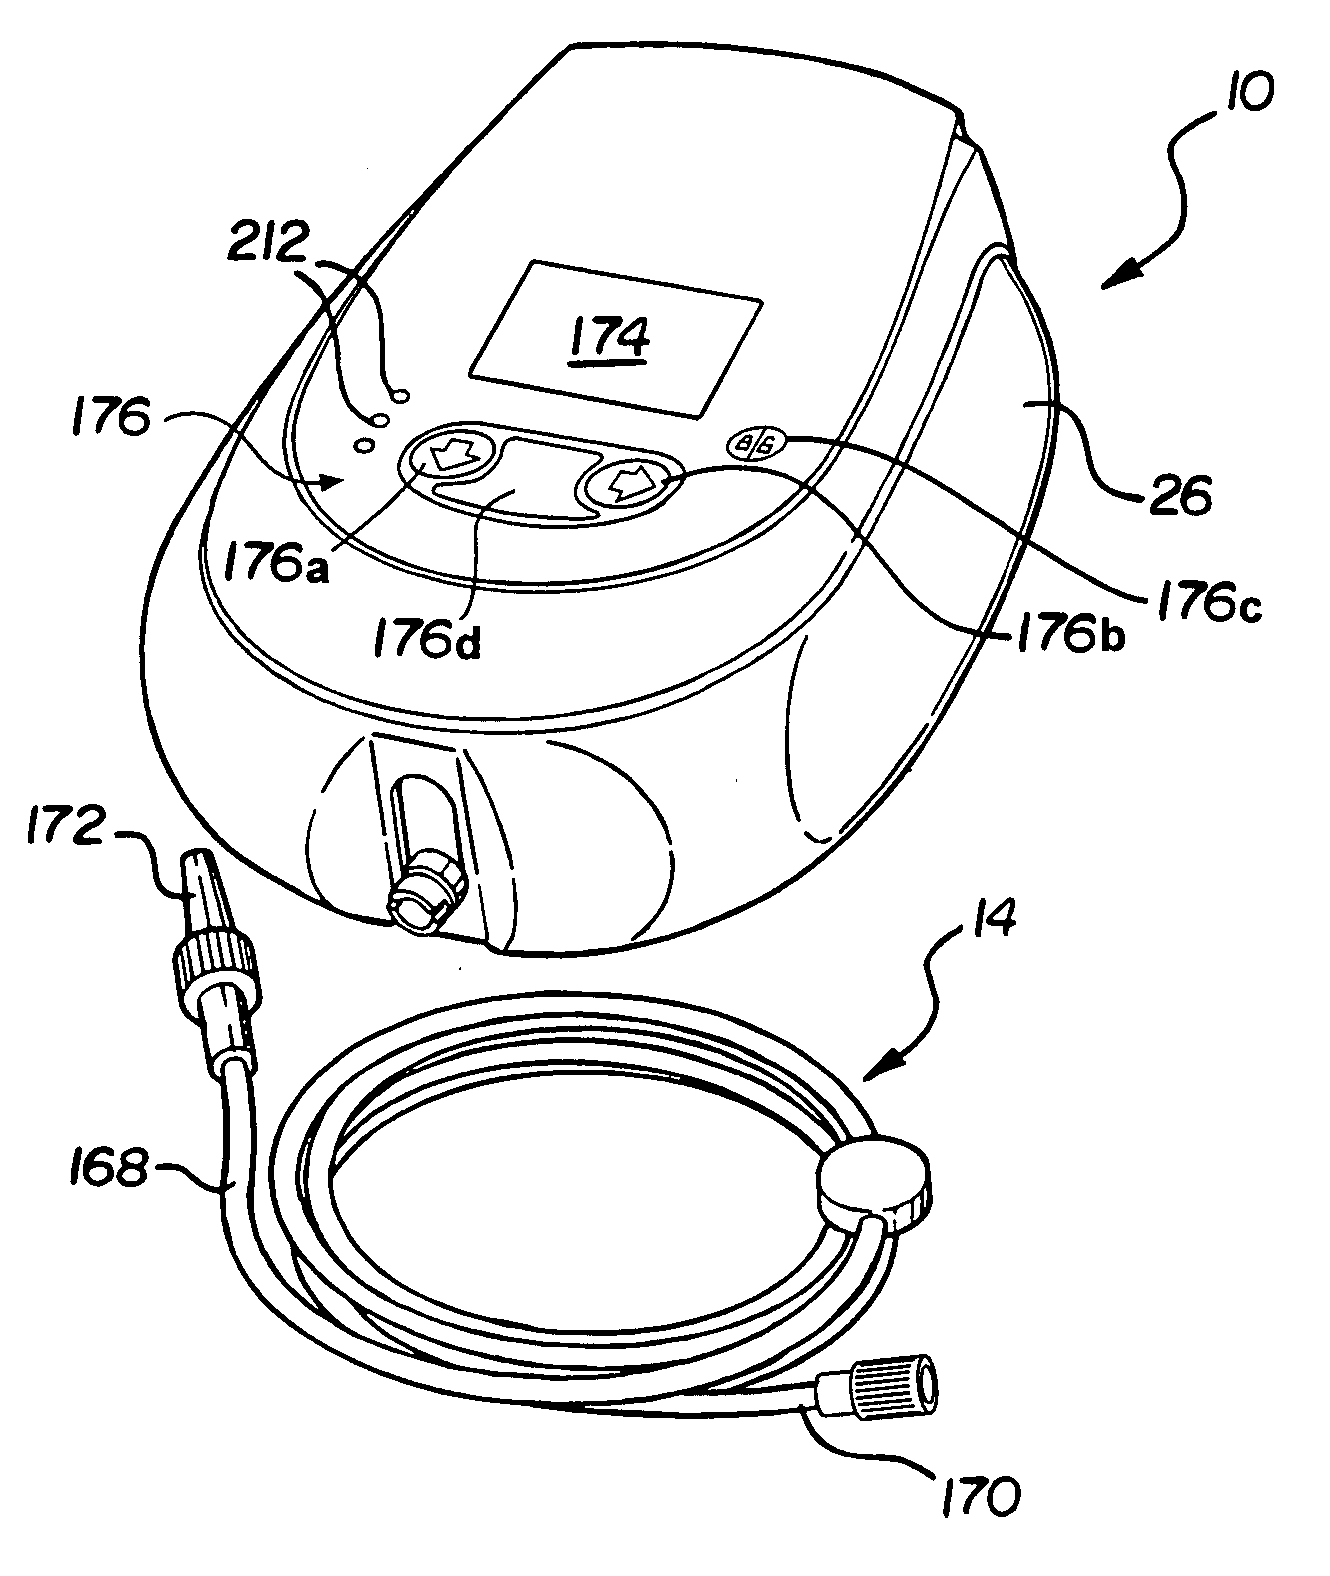 Reprogrammable fluid delivery system and method of use